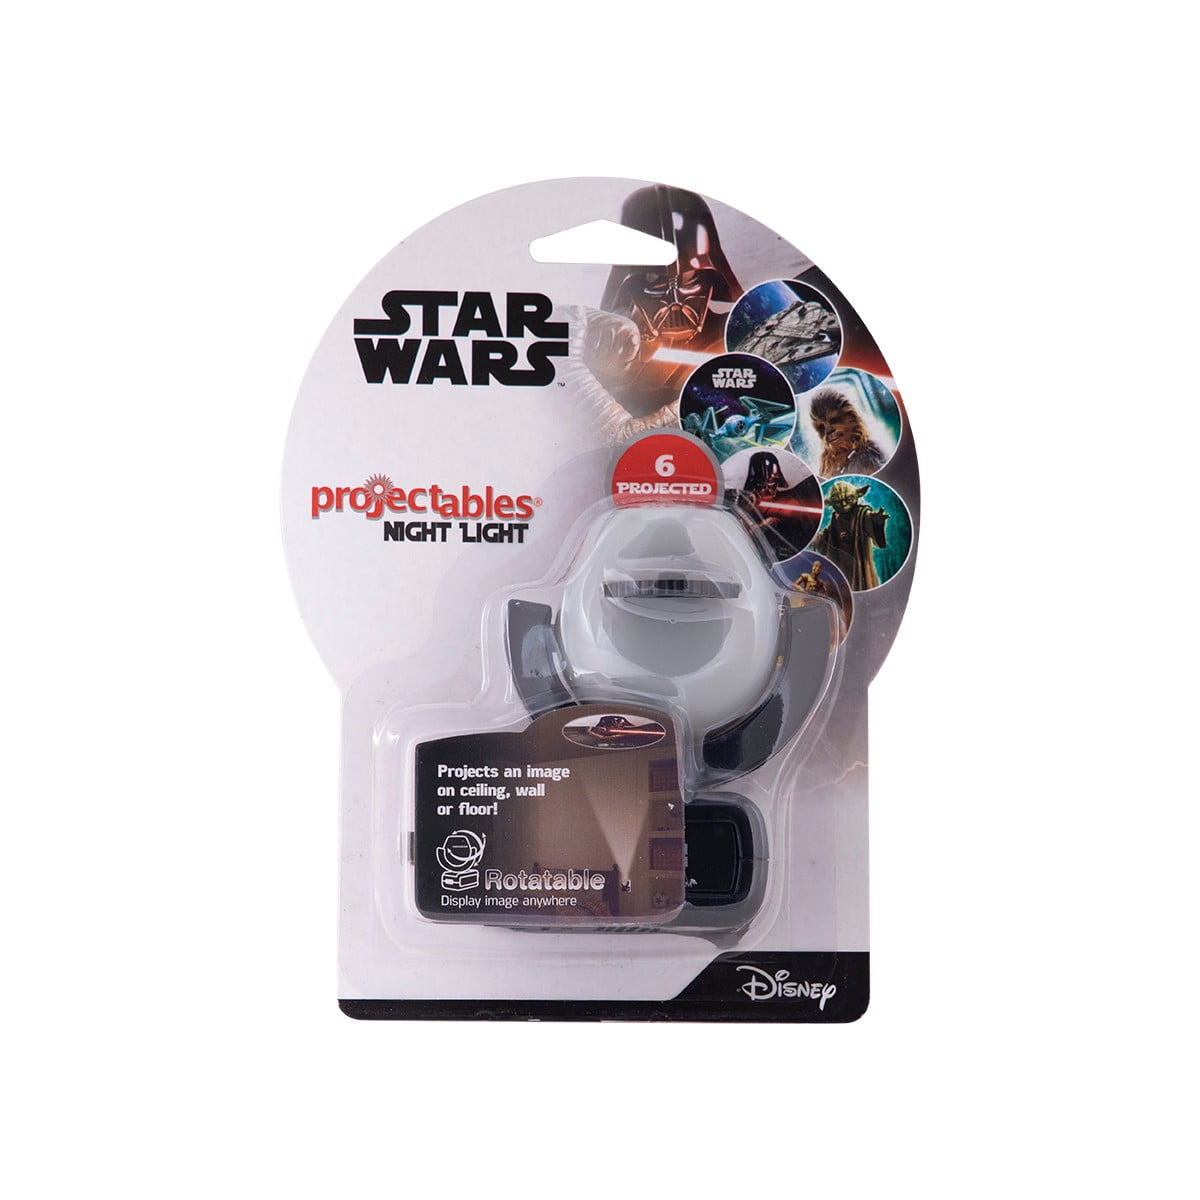 Disney Projectables Star Wars The Fighter LED Night Light NEW 3R2.610 